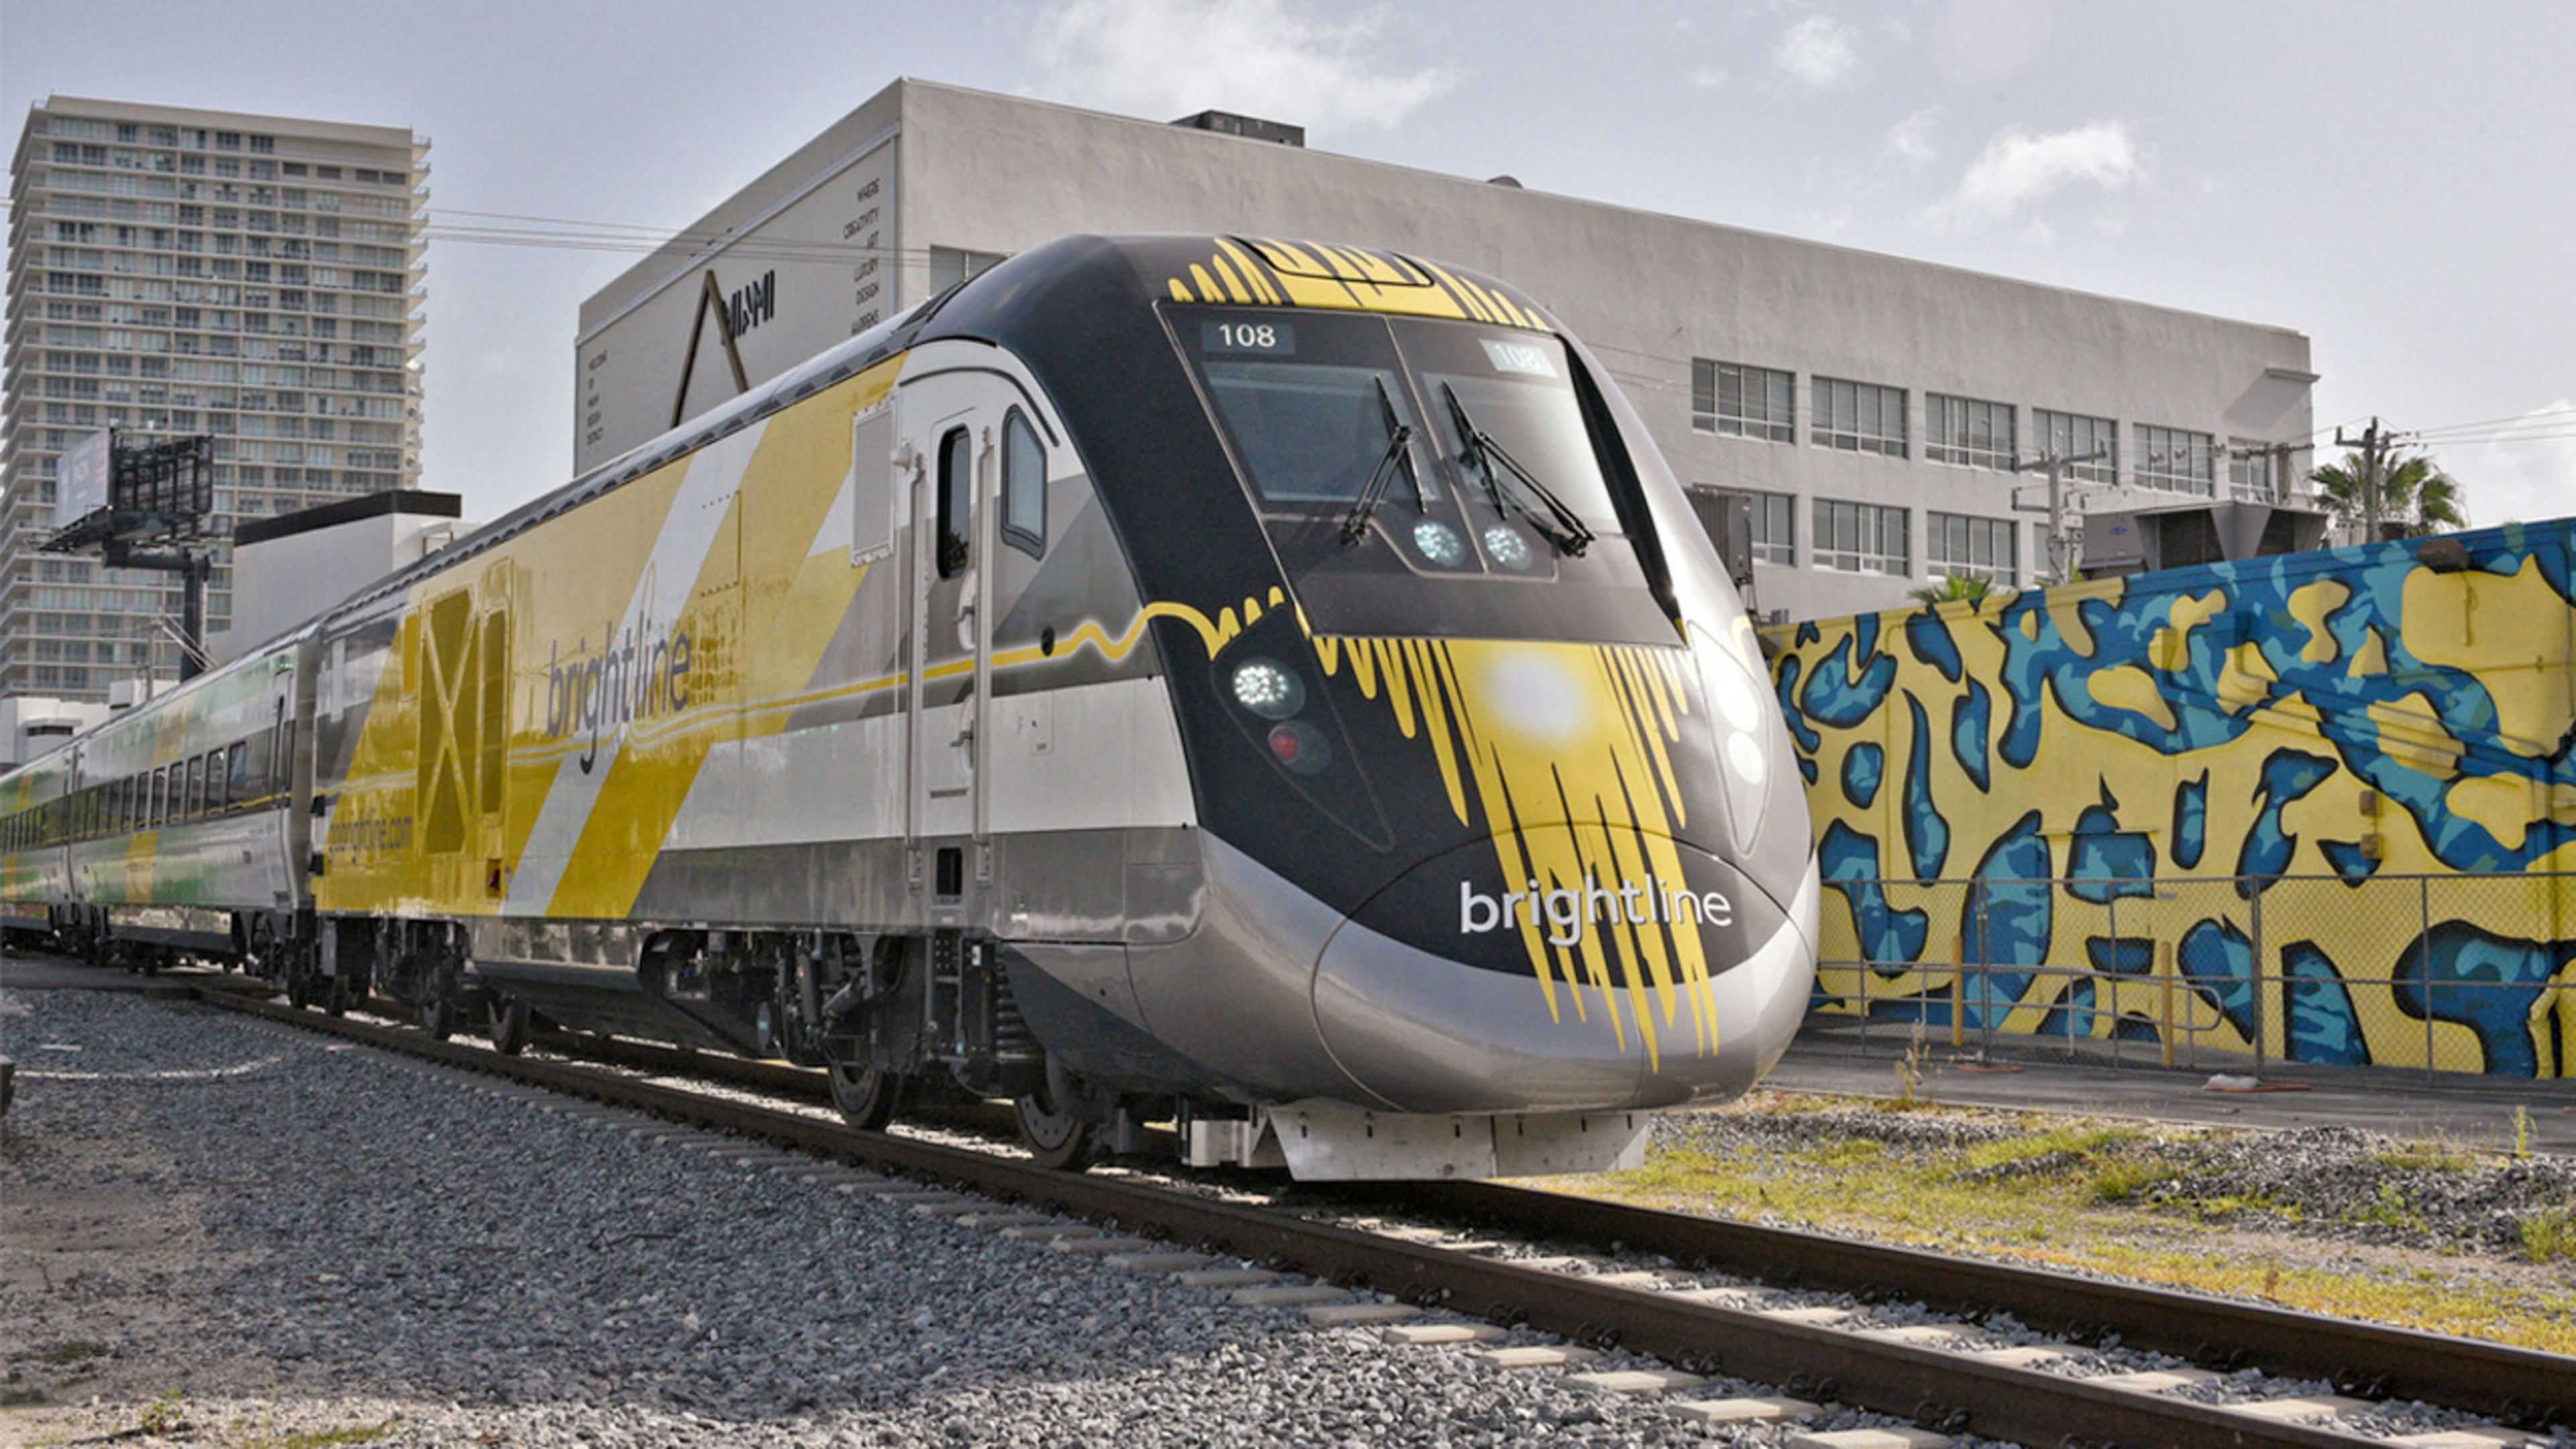 Can this new privately funded train reshape transit in Florida?